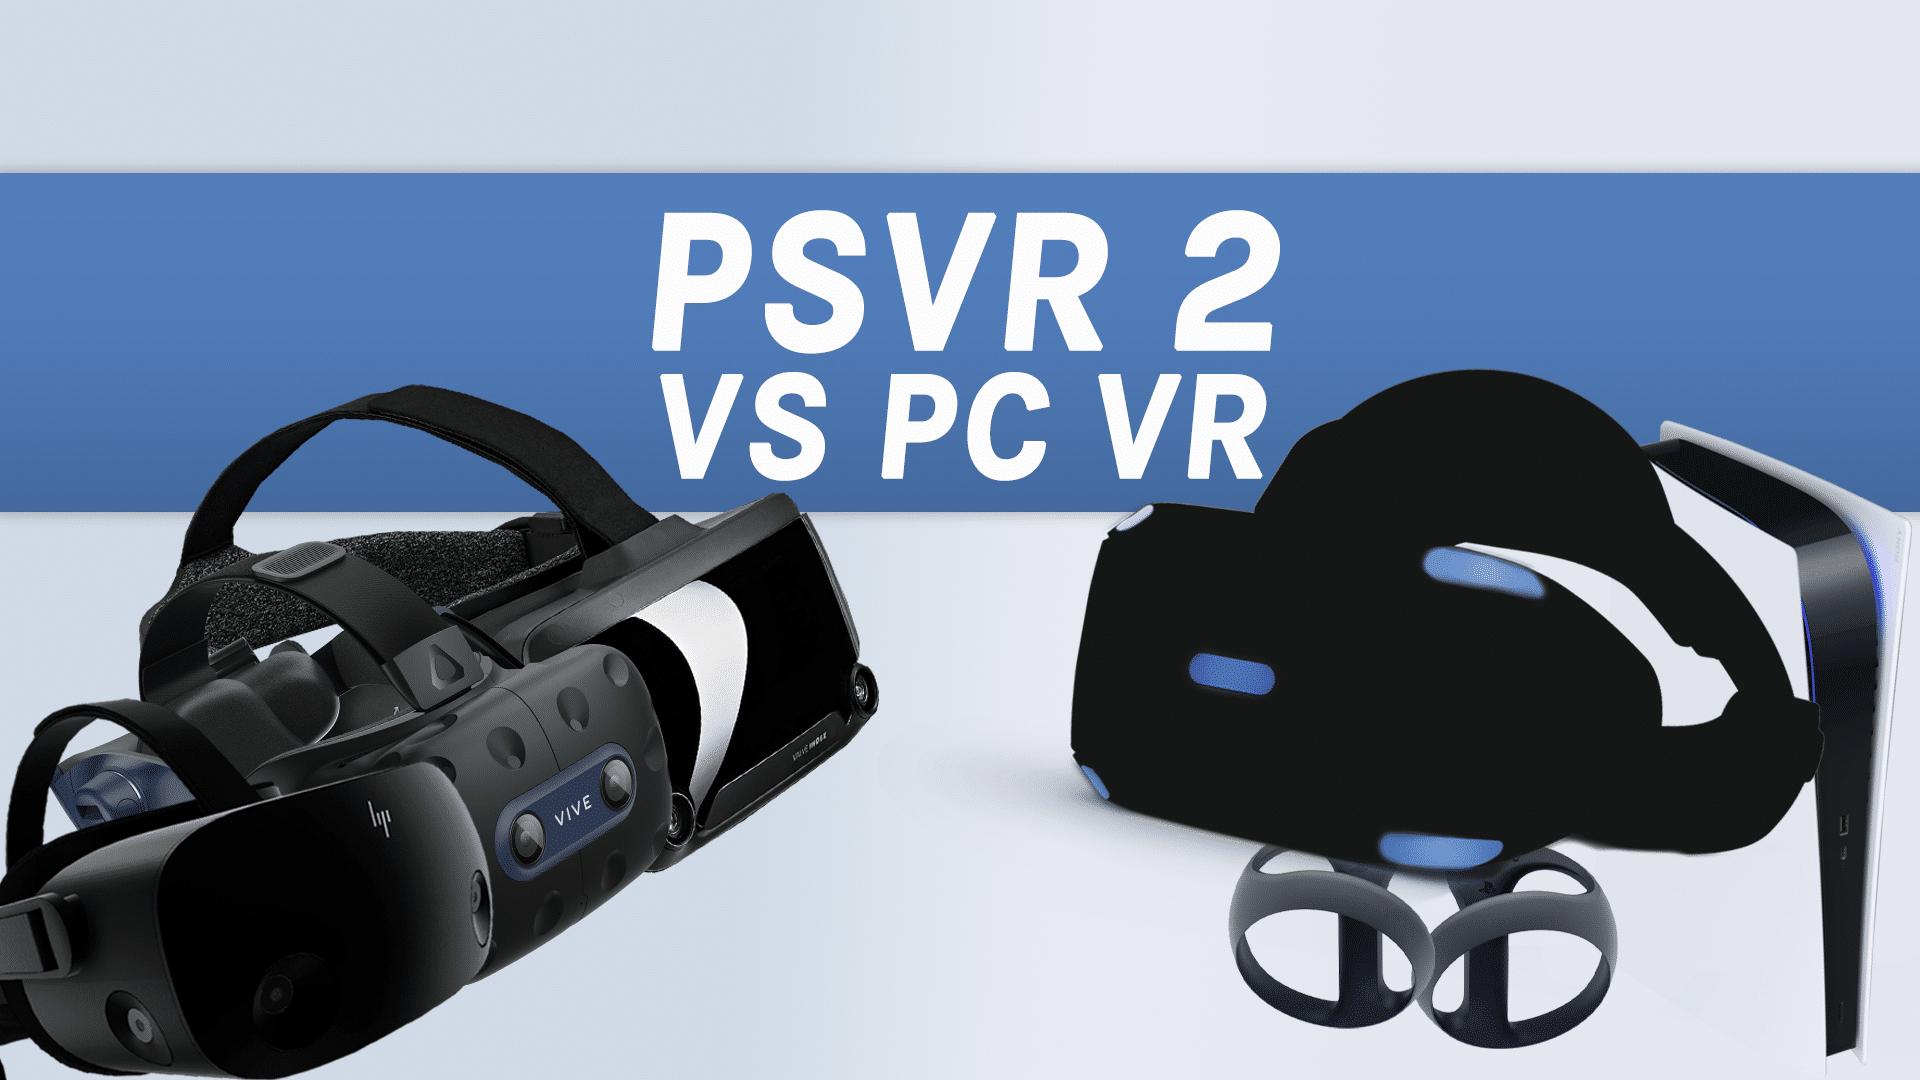 PlayStation VR 2: PSVR 2 specs, features, everything we know